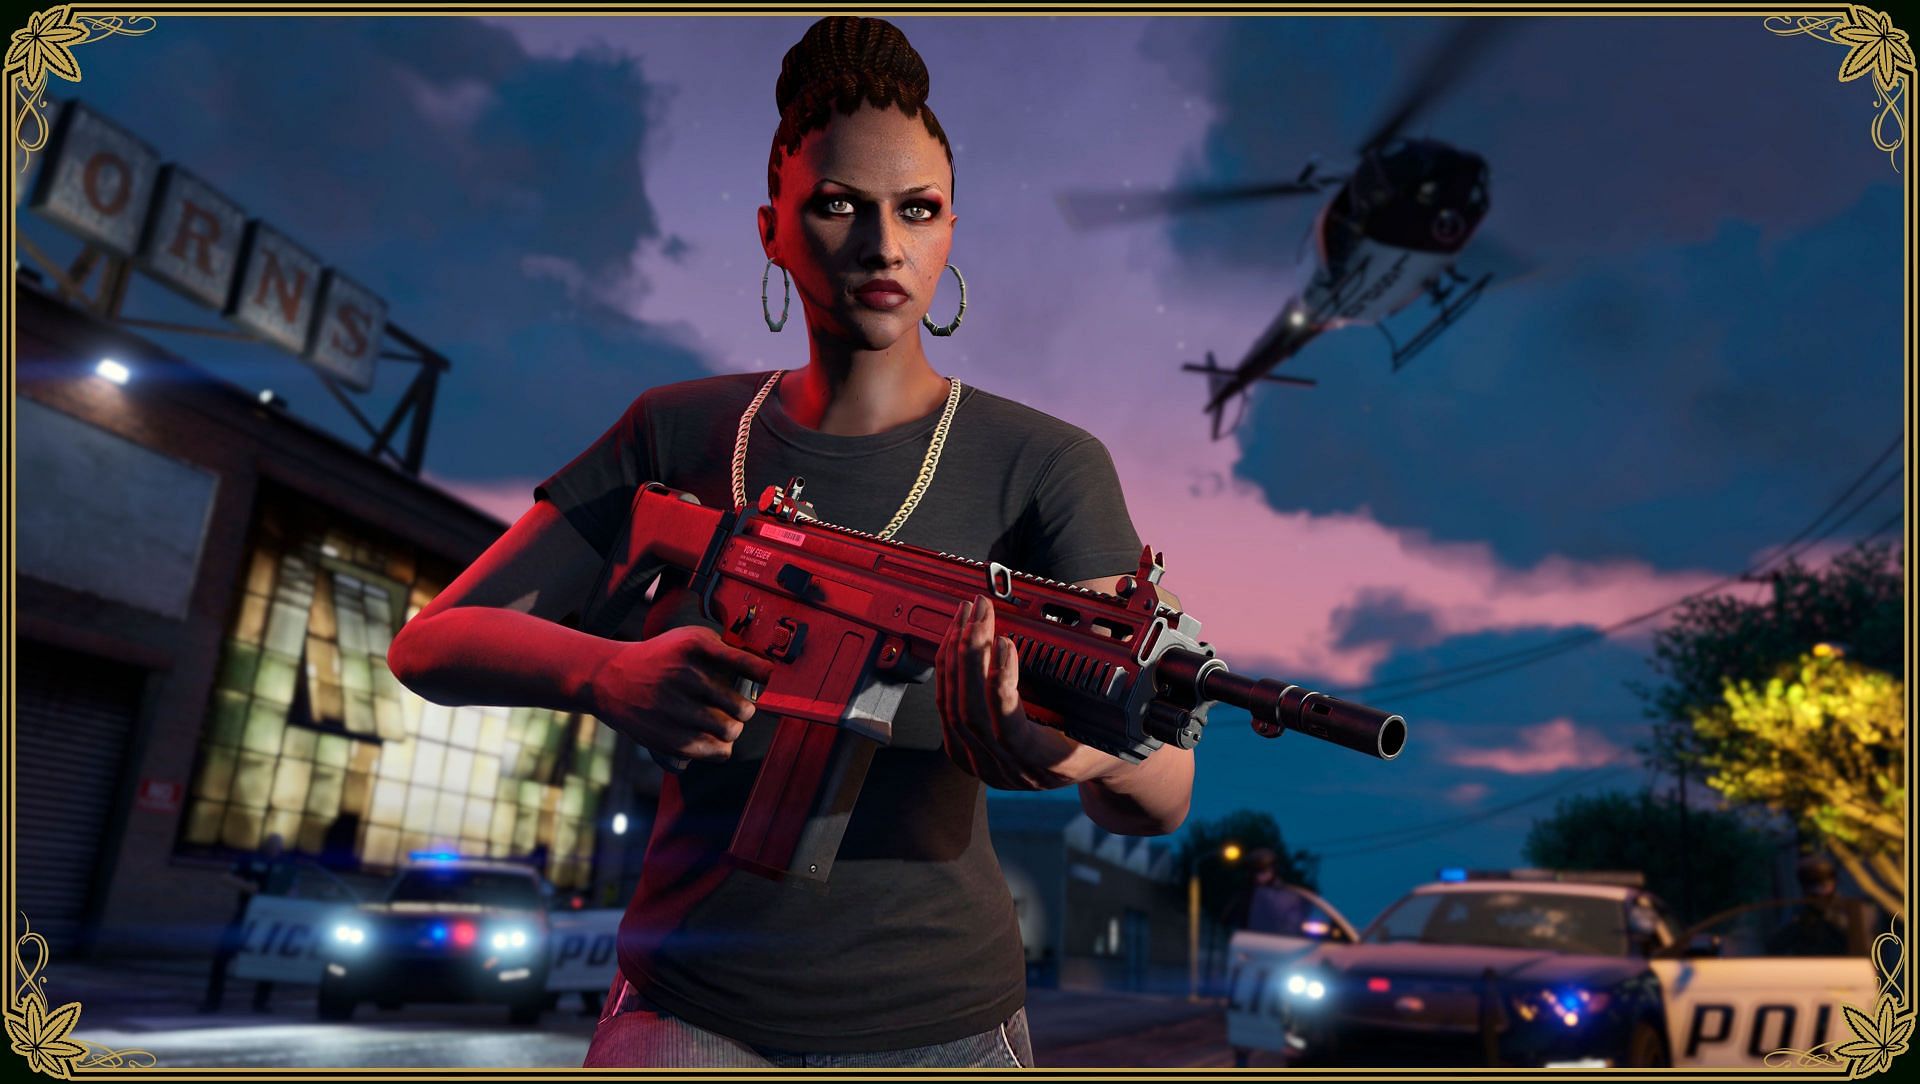 The official screenshot featuring the Heavy Rifle (Image via Rockstar Games)